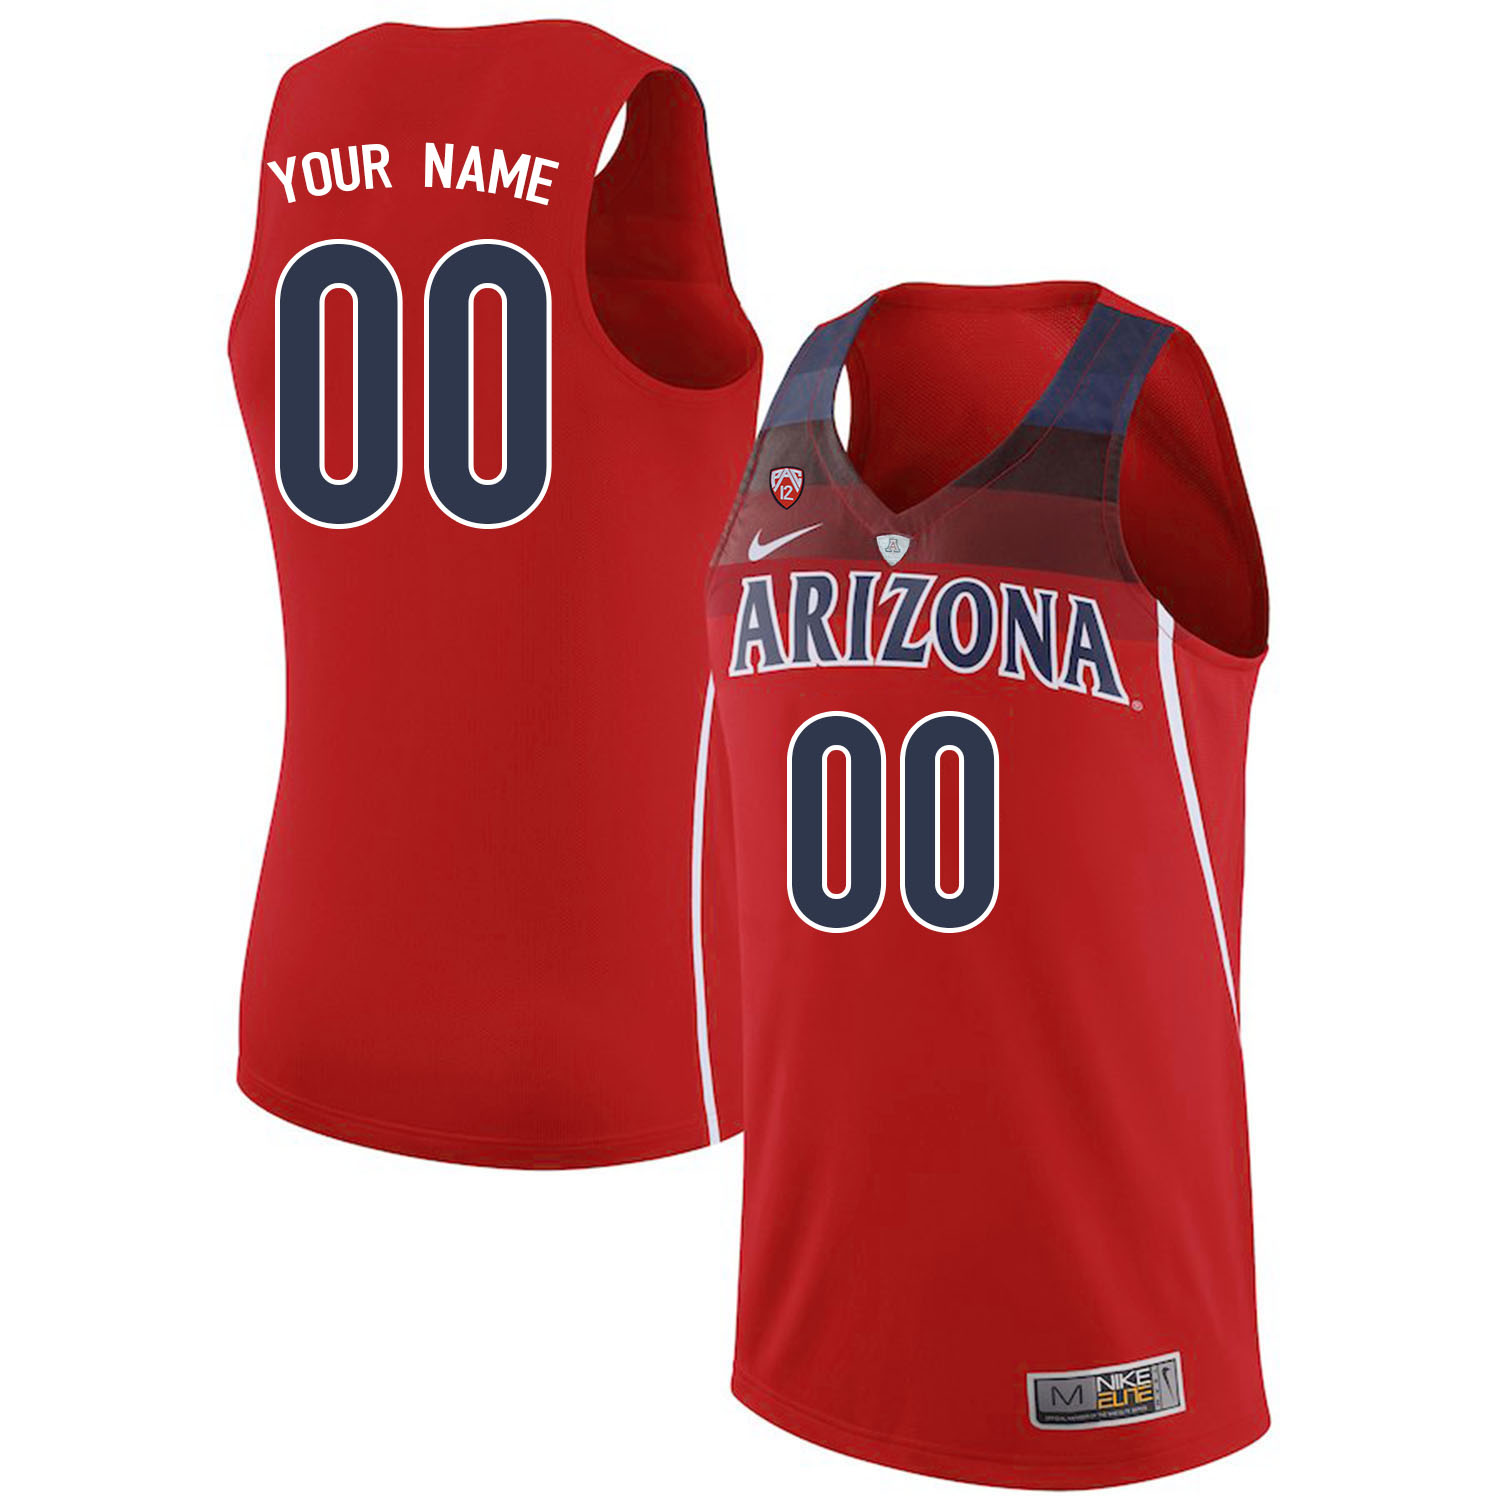 Custom Arizona Wildcats Name And Number College Basketball Jerseys Stitched-Red - Click Image to Close